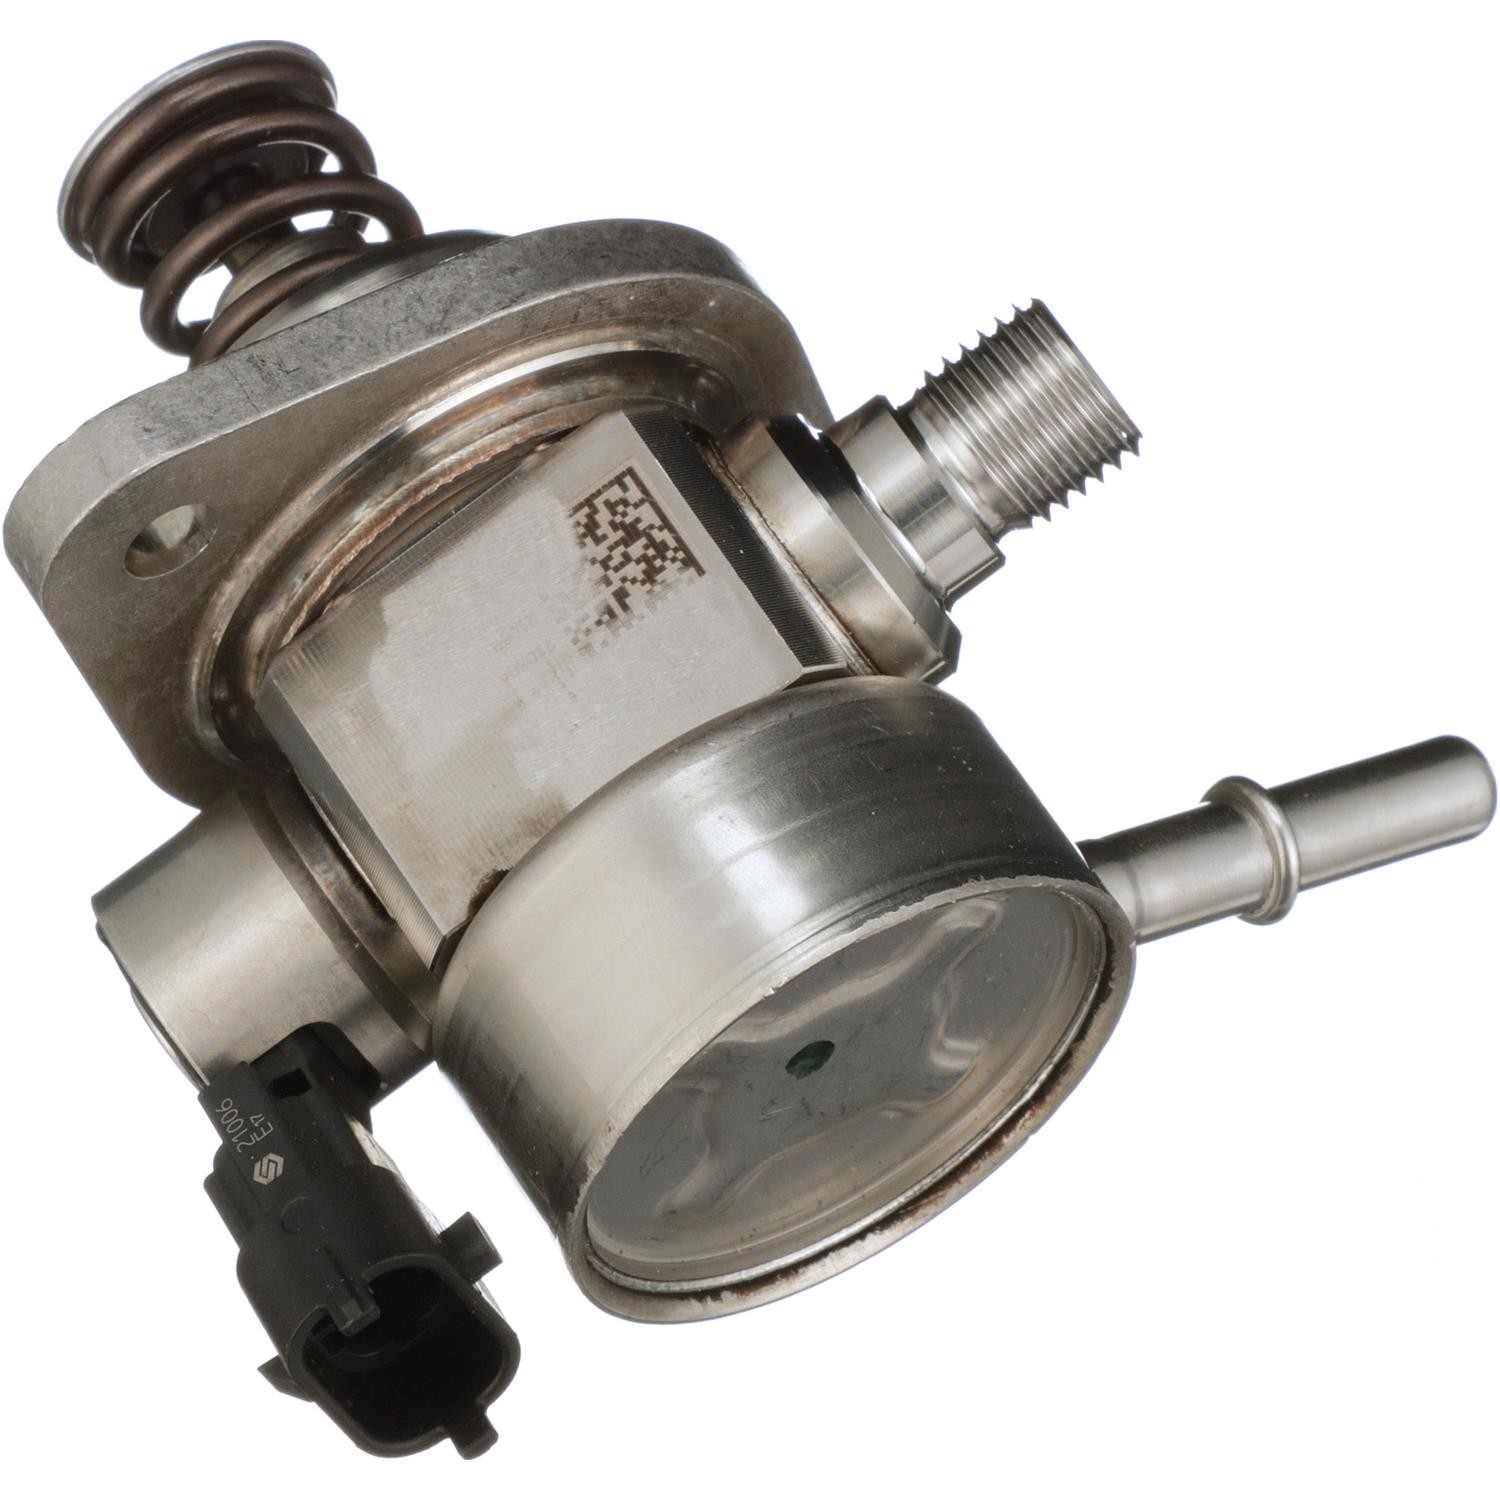 Front View of Direct Injection High Pressure Fuel Pump STANDARD IGNITION GDP207